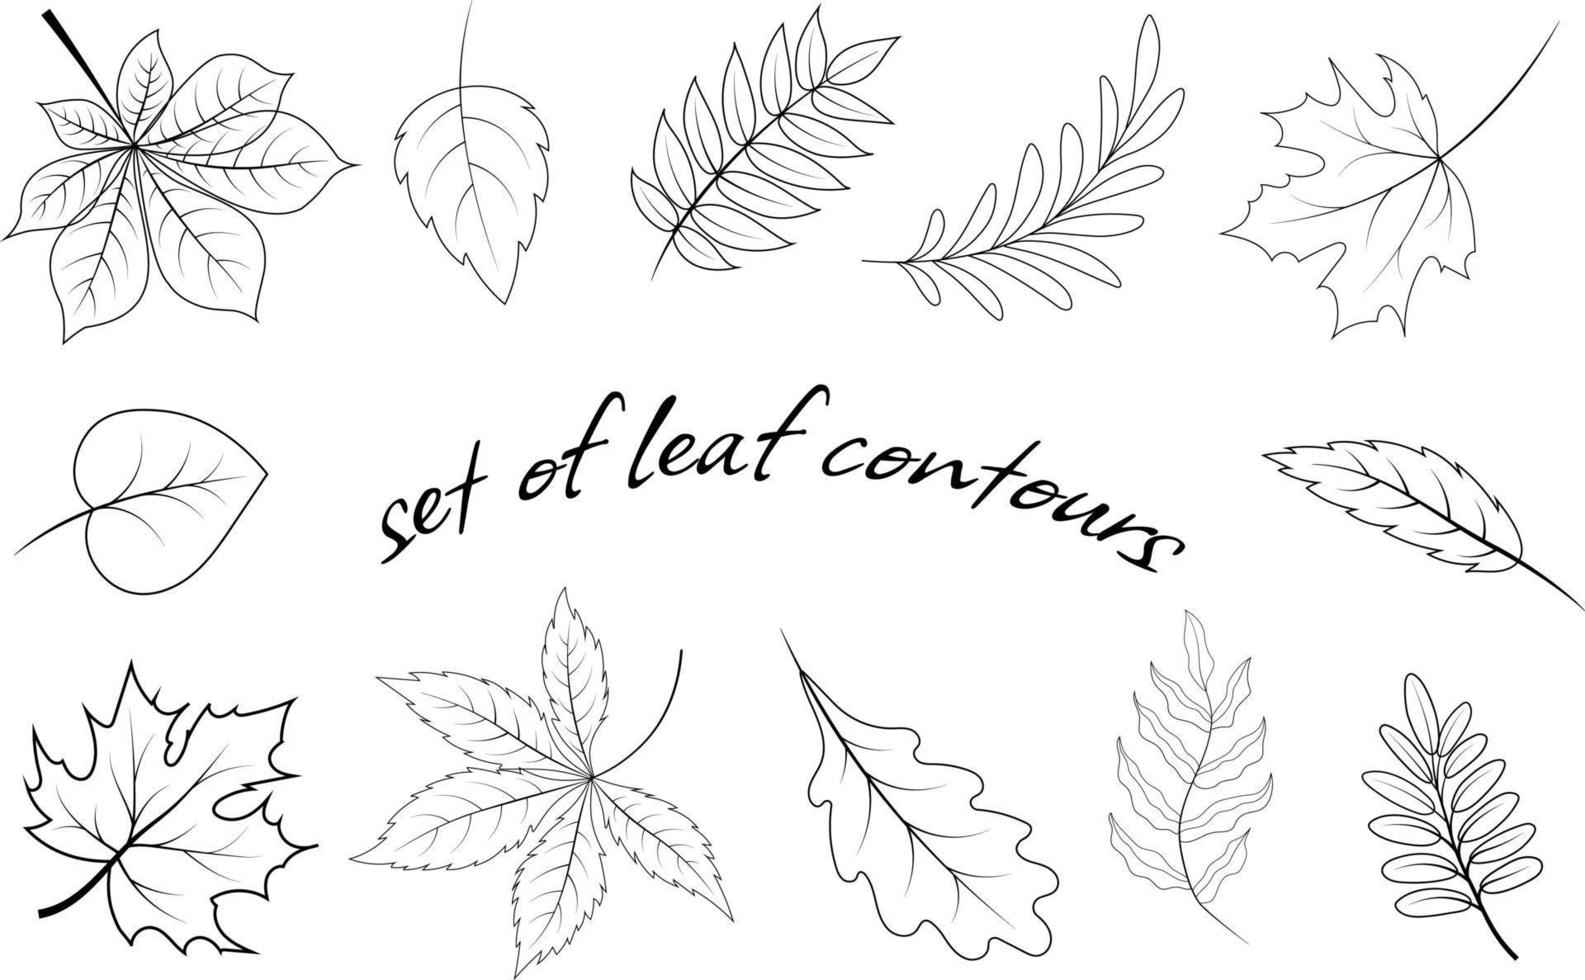 Set of leaf contours of various trees vector